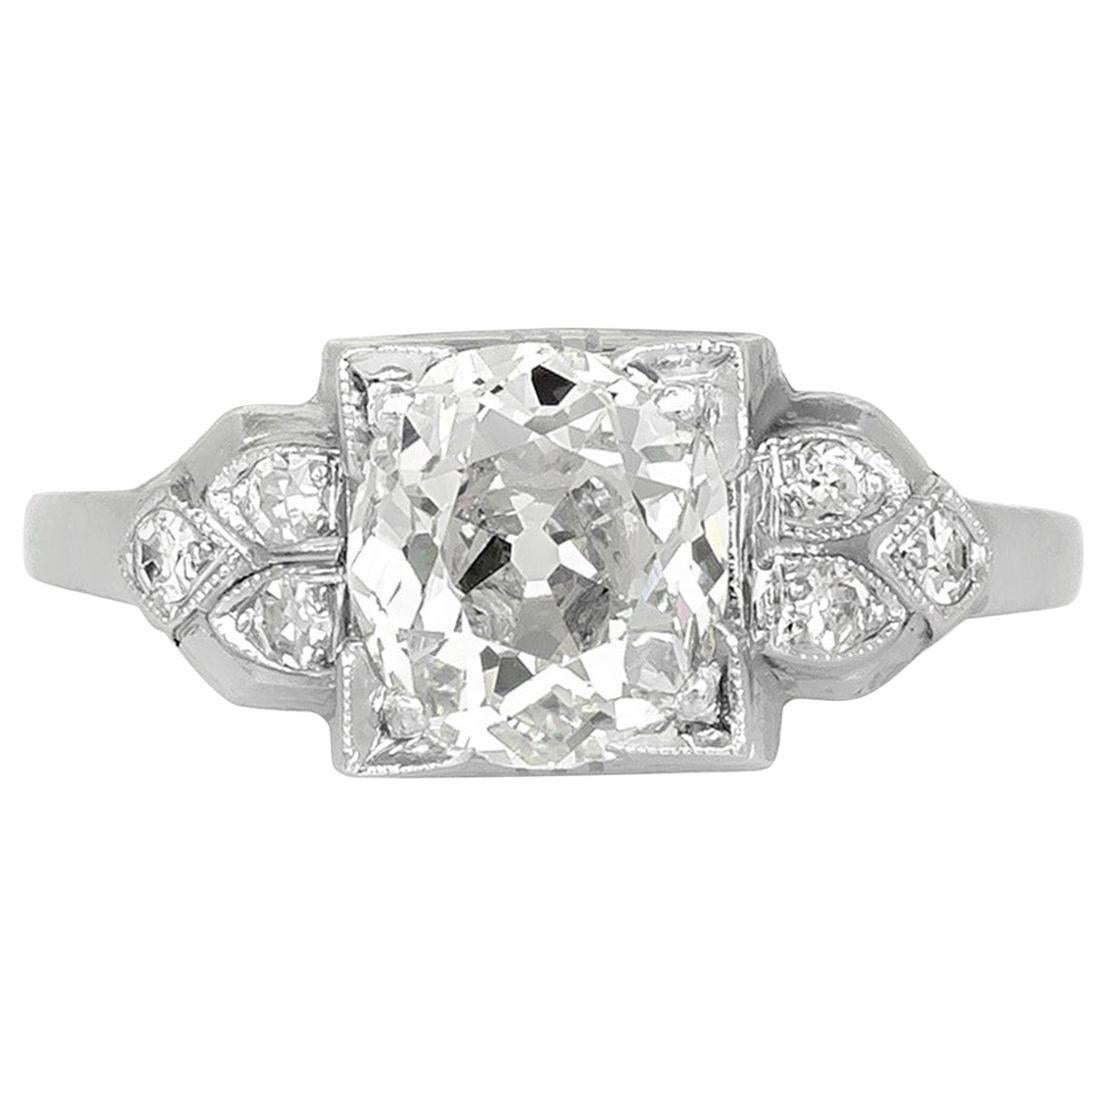 1920s-1930s Platinum Engagement Ring with 1.74 Carat Round Diamond For Sale